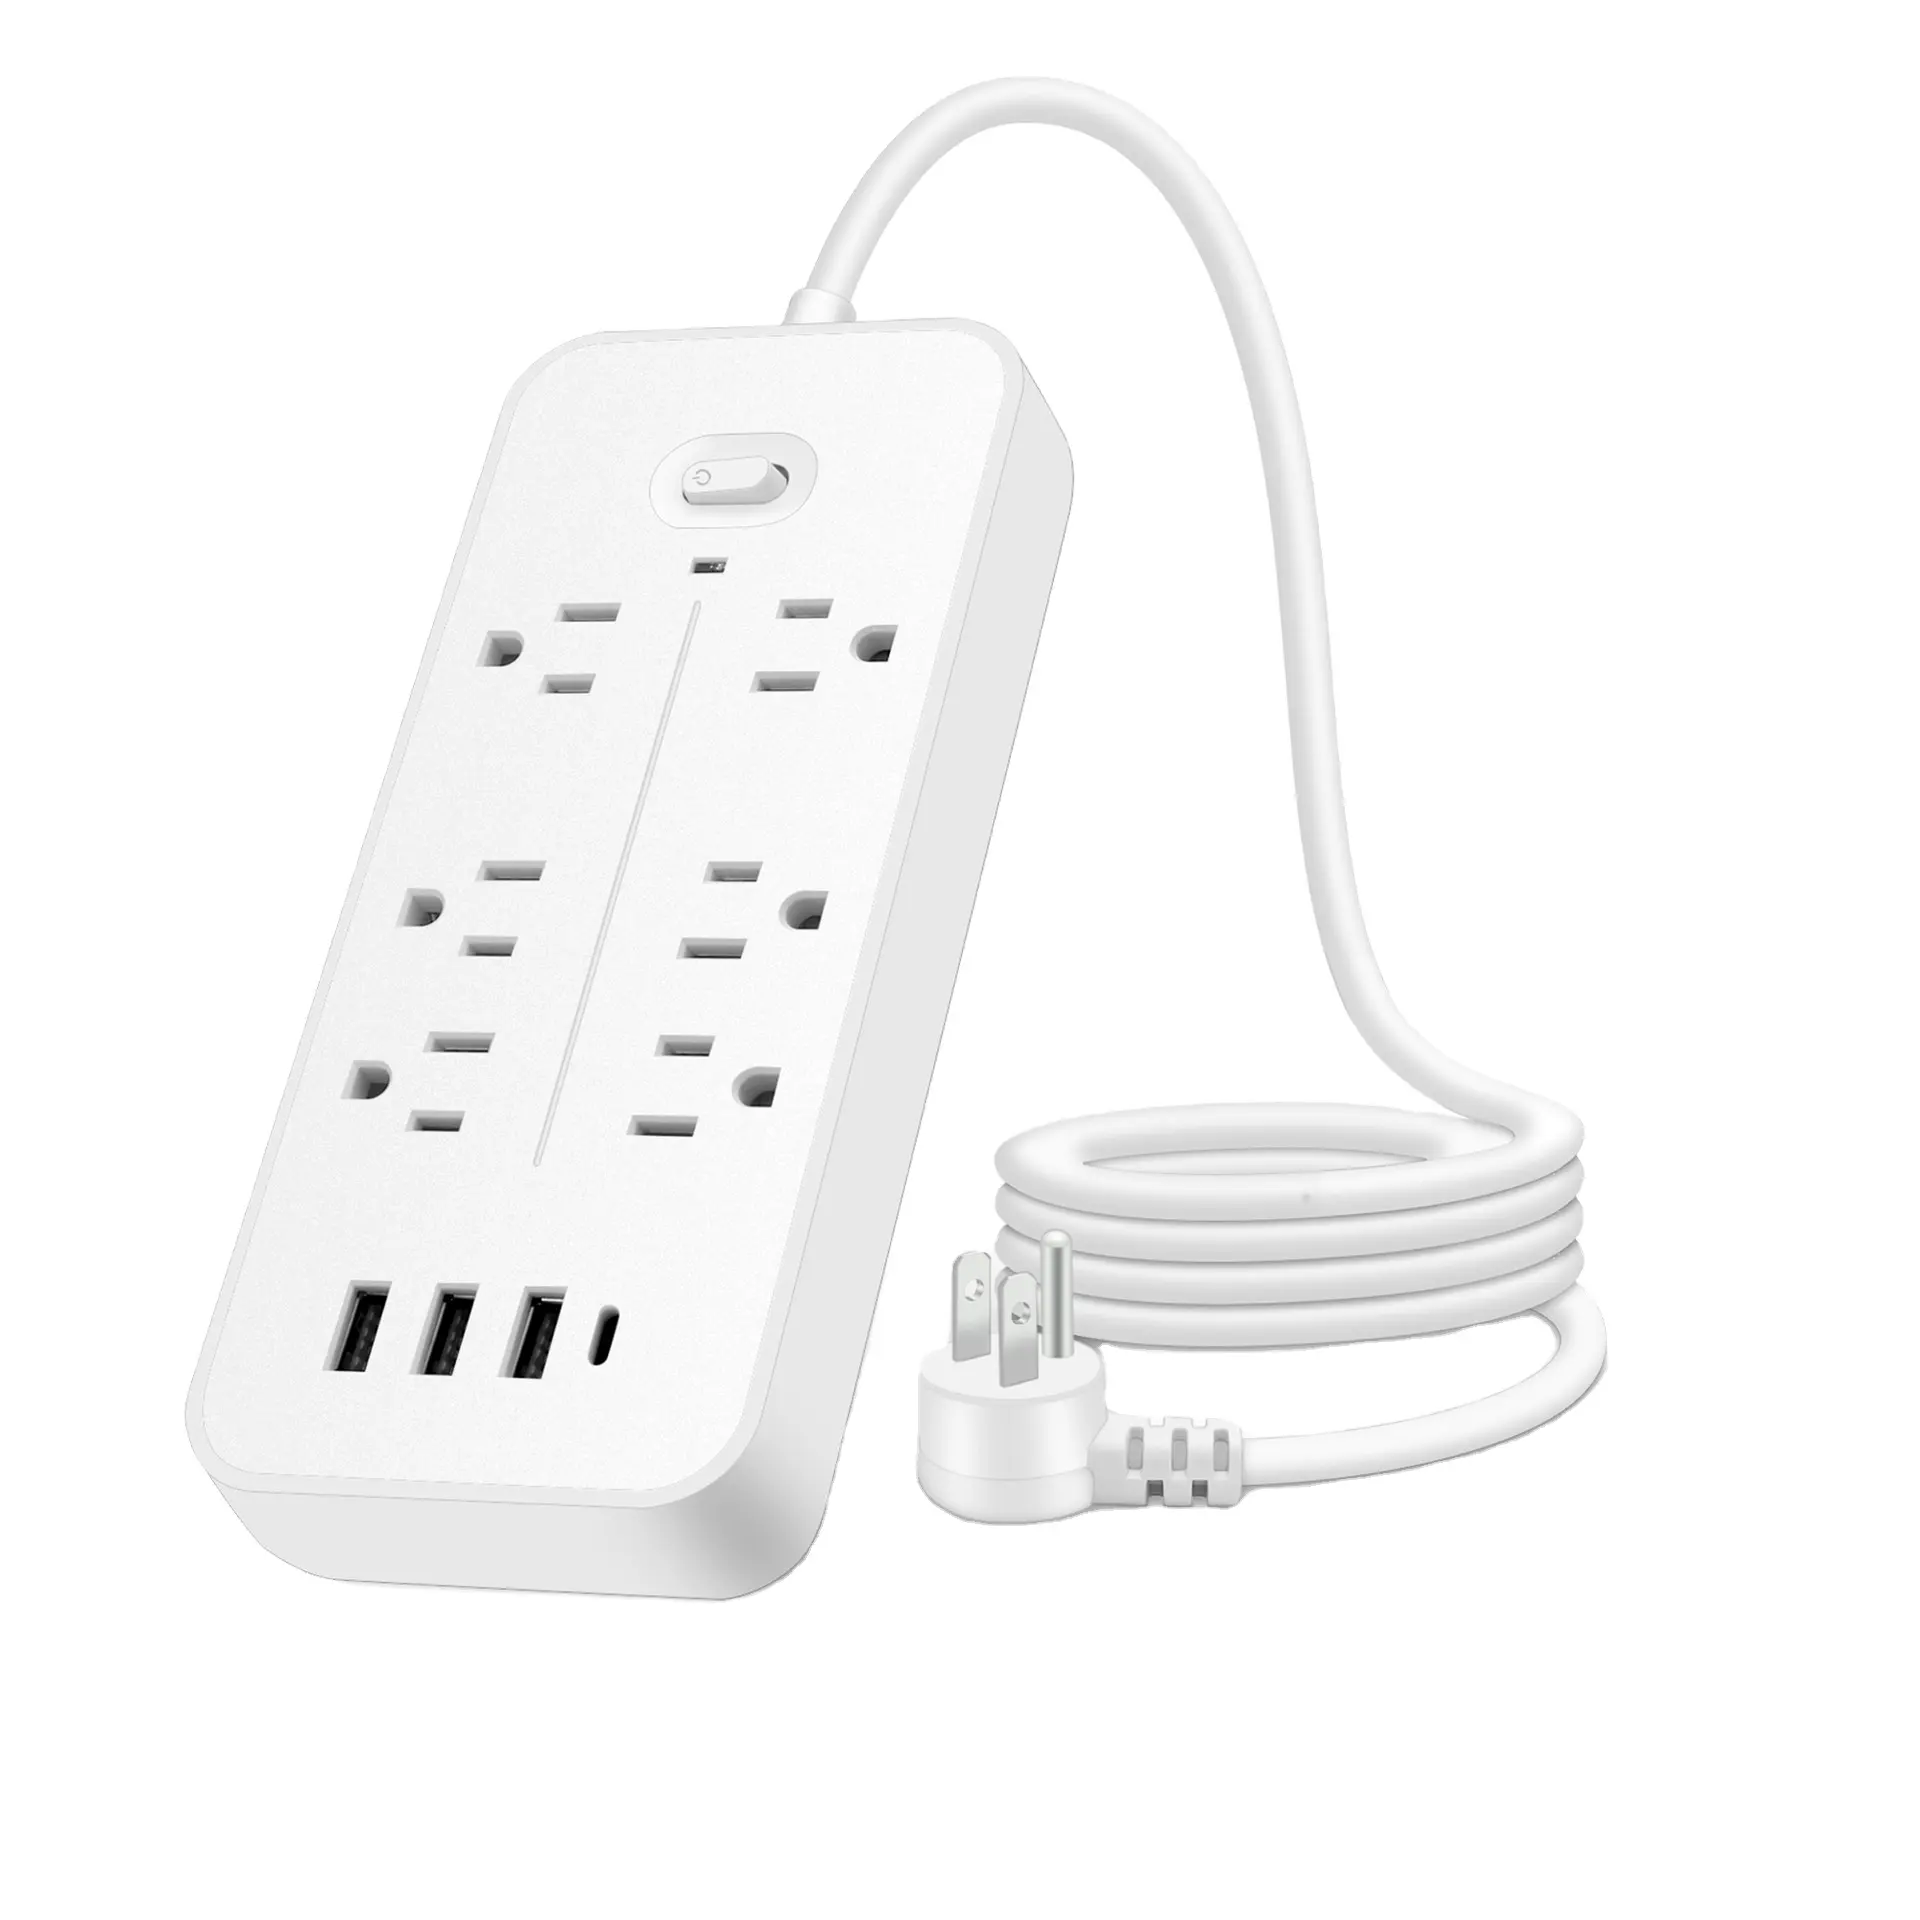 US Canada Thailand Mexico Outlet Extender Hotel Office Home Outlet Extension Power Strip 6 Outlets 3USBPlug Adapter 1.2m Wires